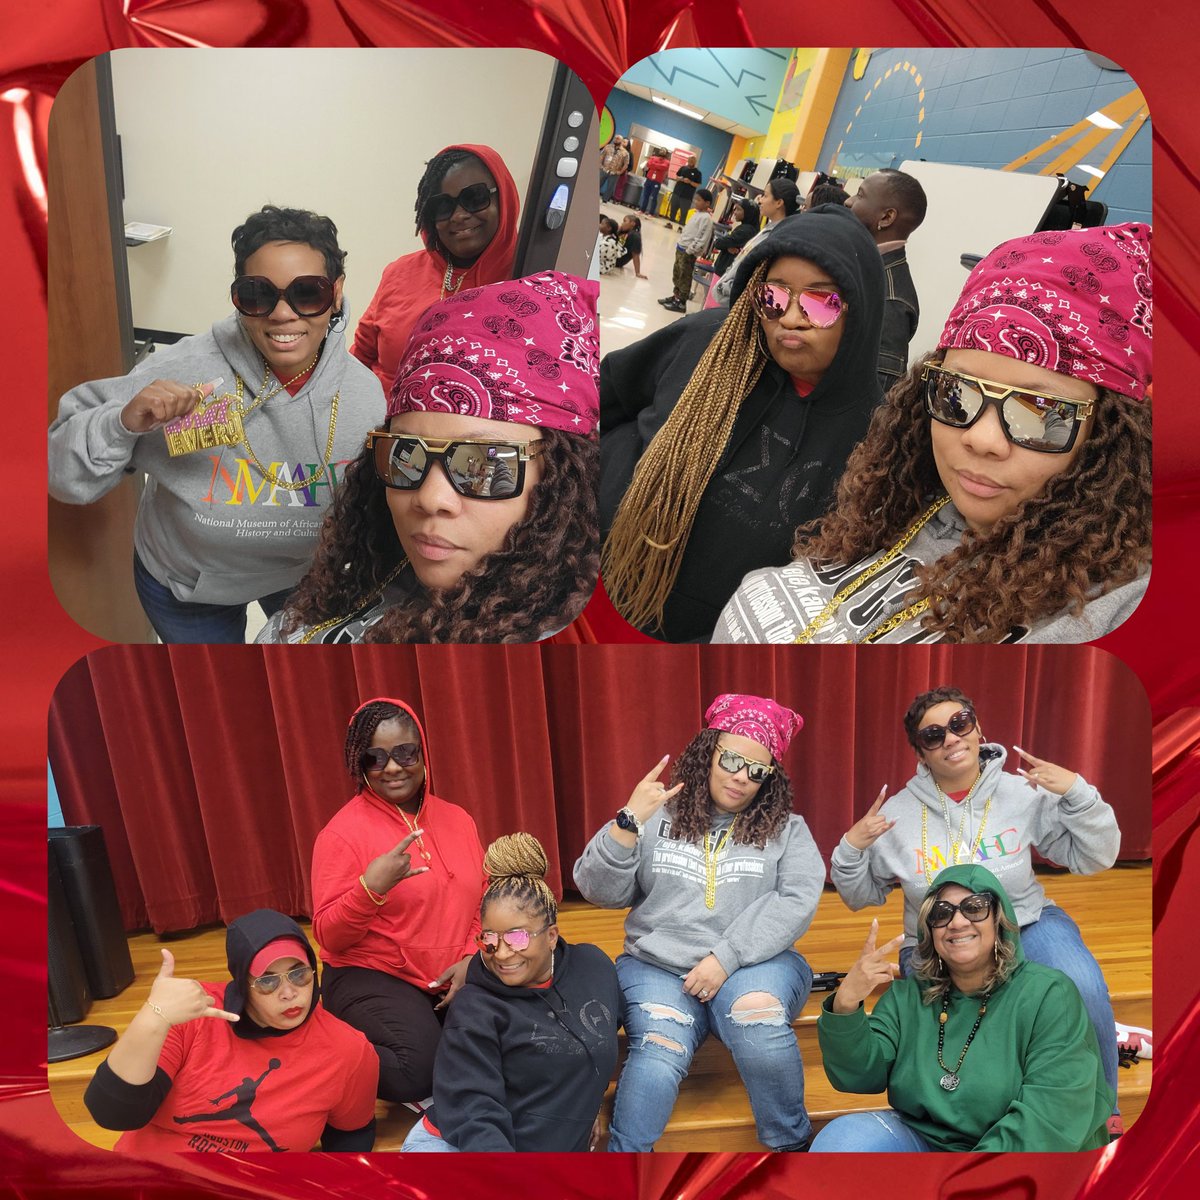 The LeaderSHIFT Team came prepared for our Math STAAR Rap Battle. #SpencePRIDE #SpenceGRIND